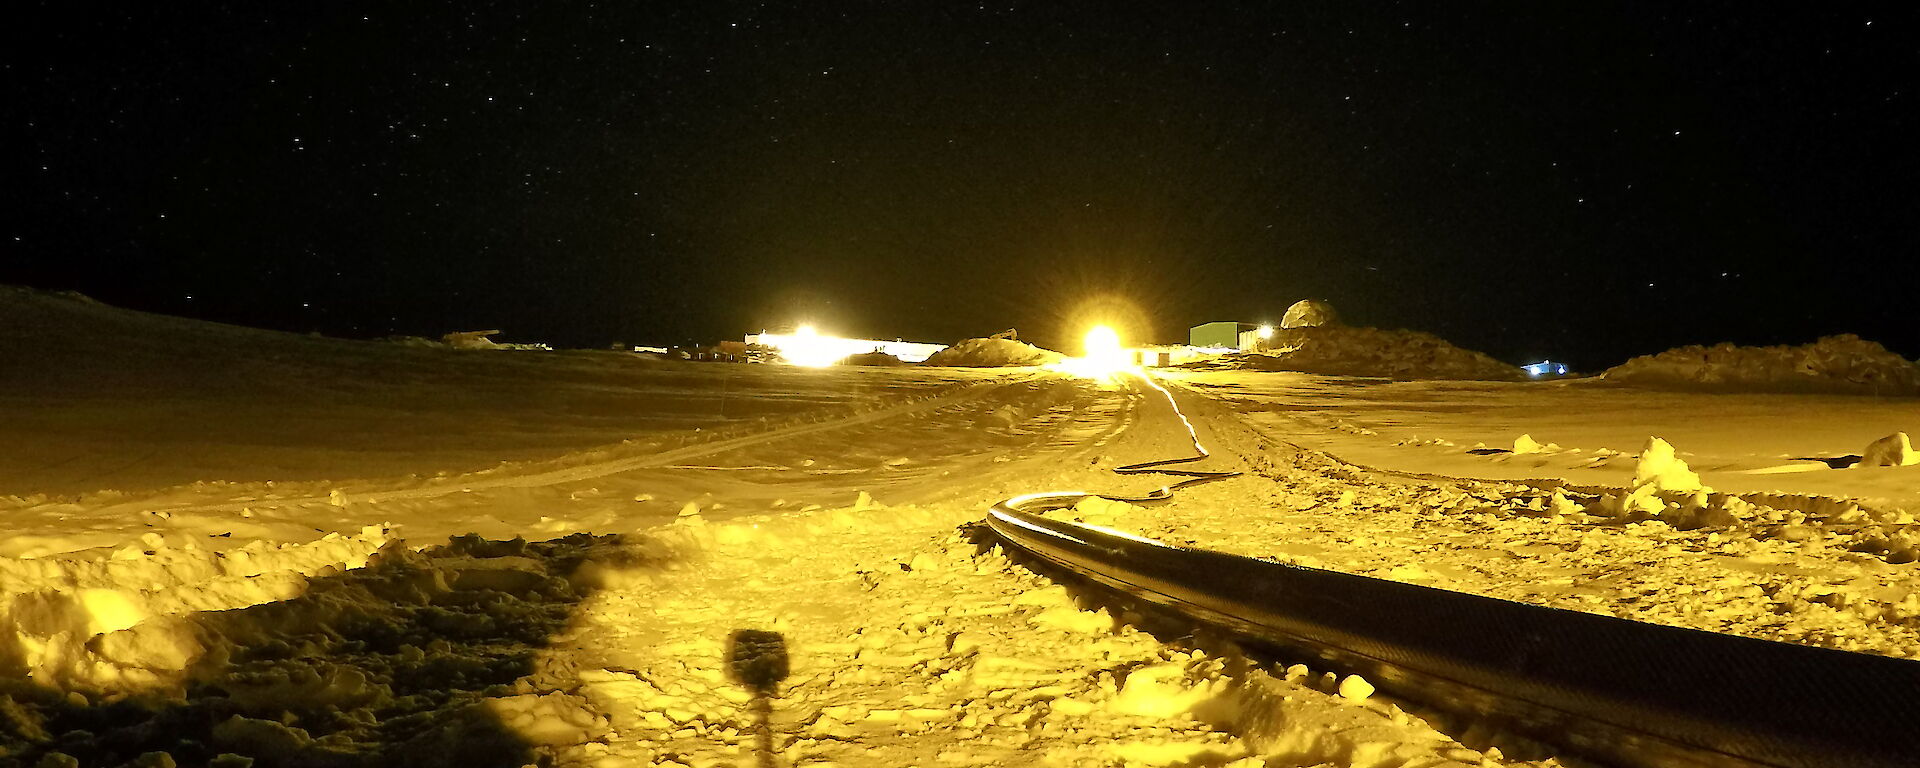 A long black hose lying across the snow with the Station in the background